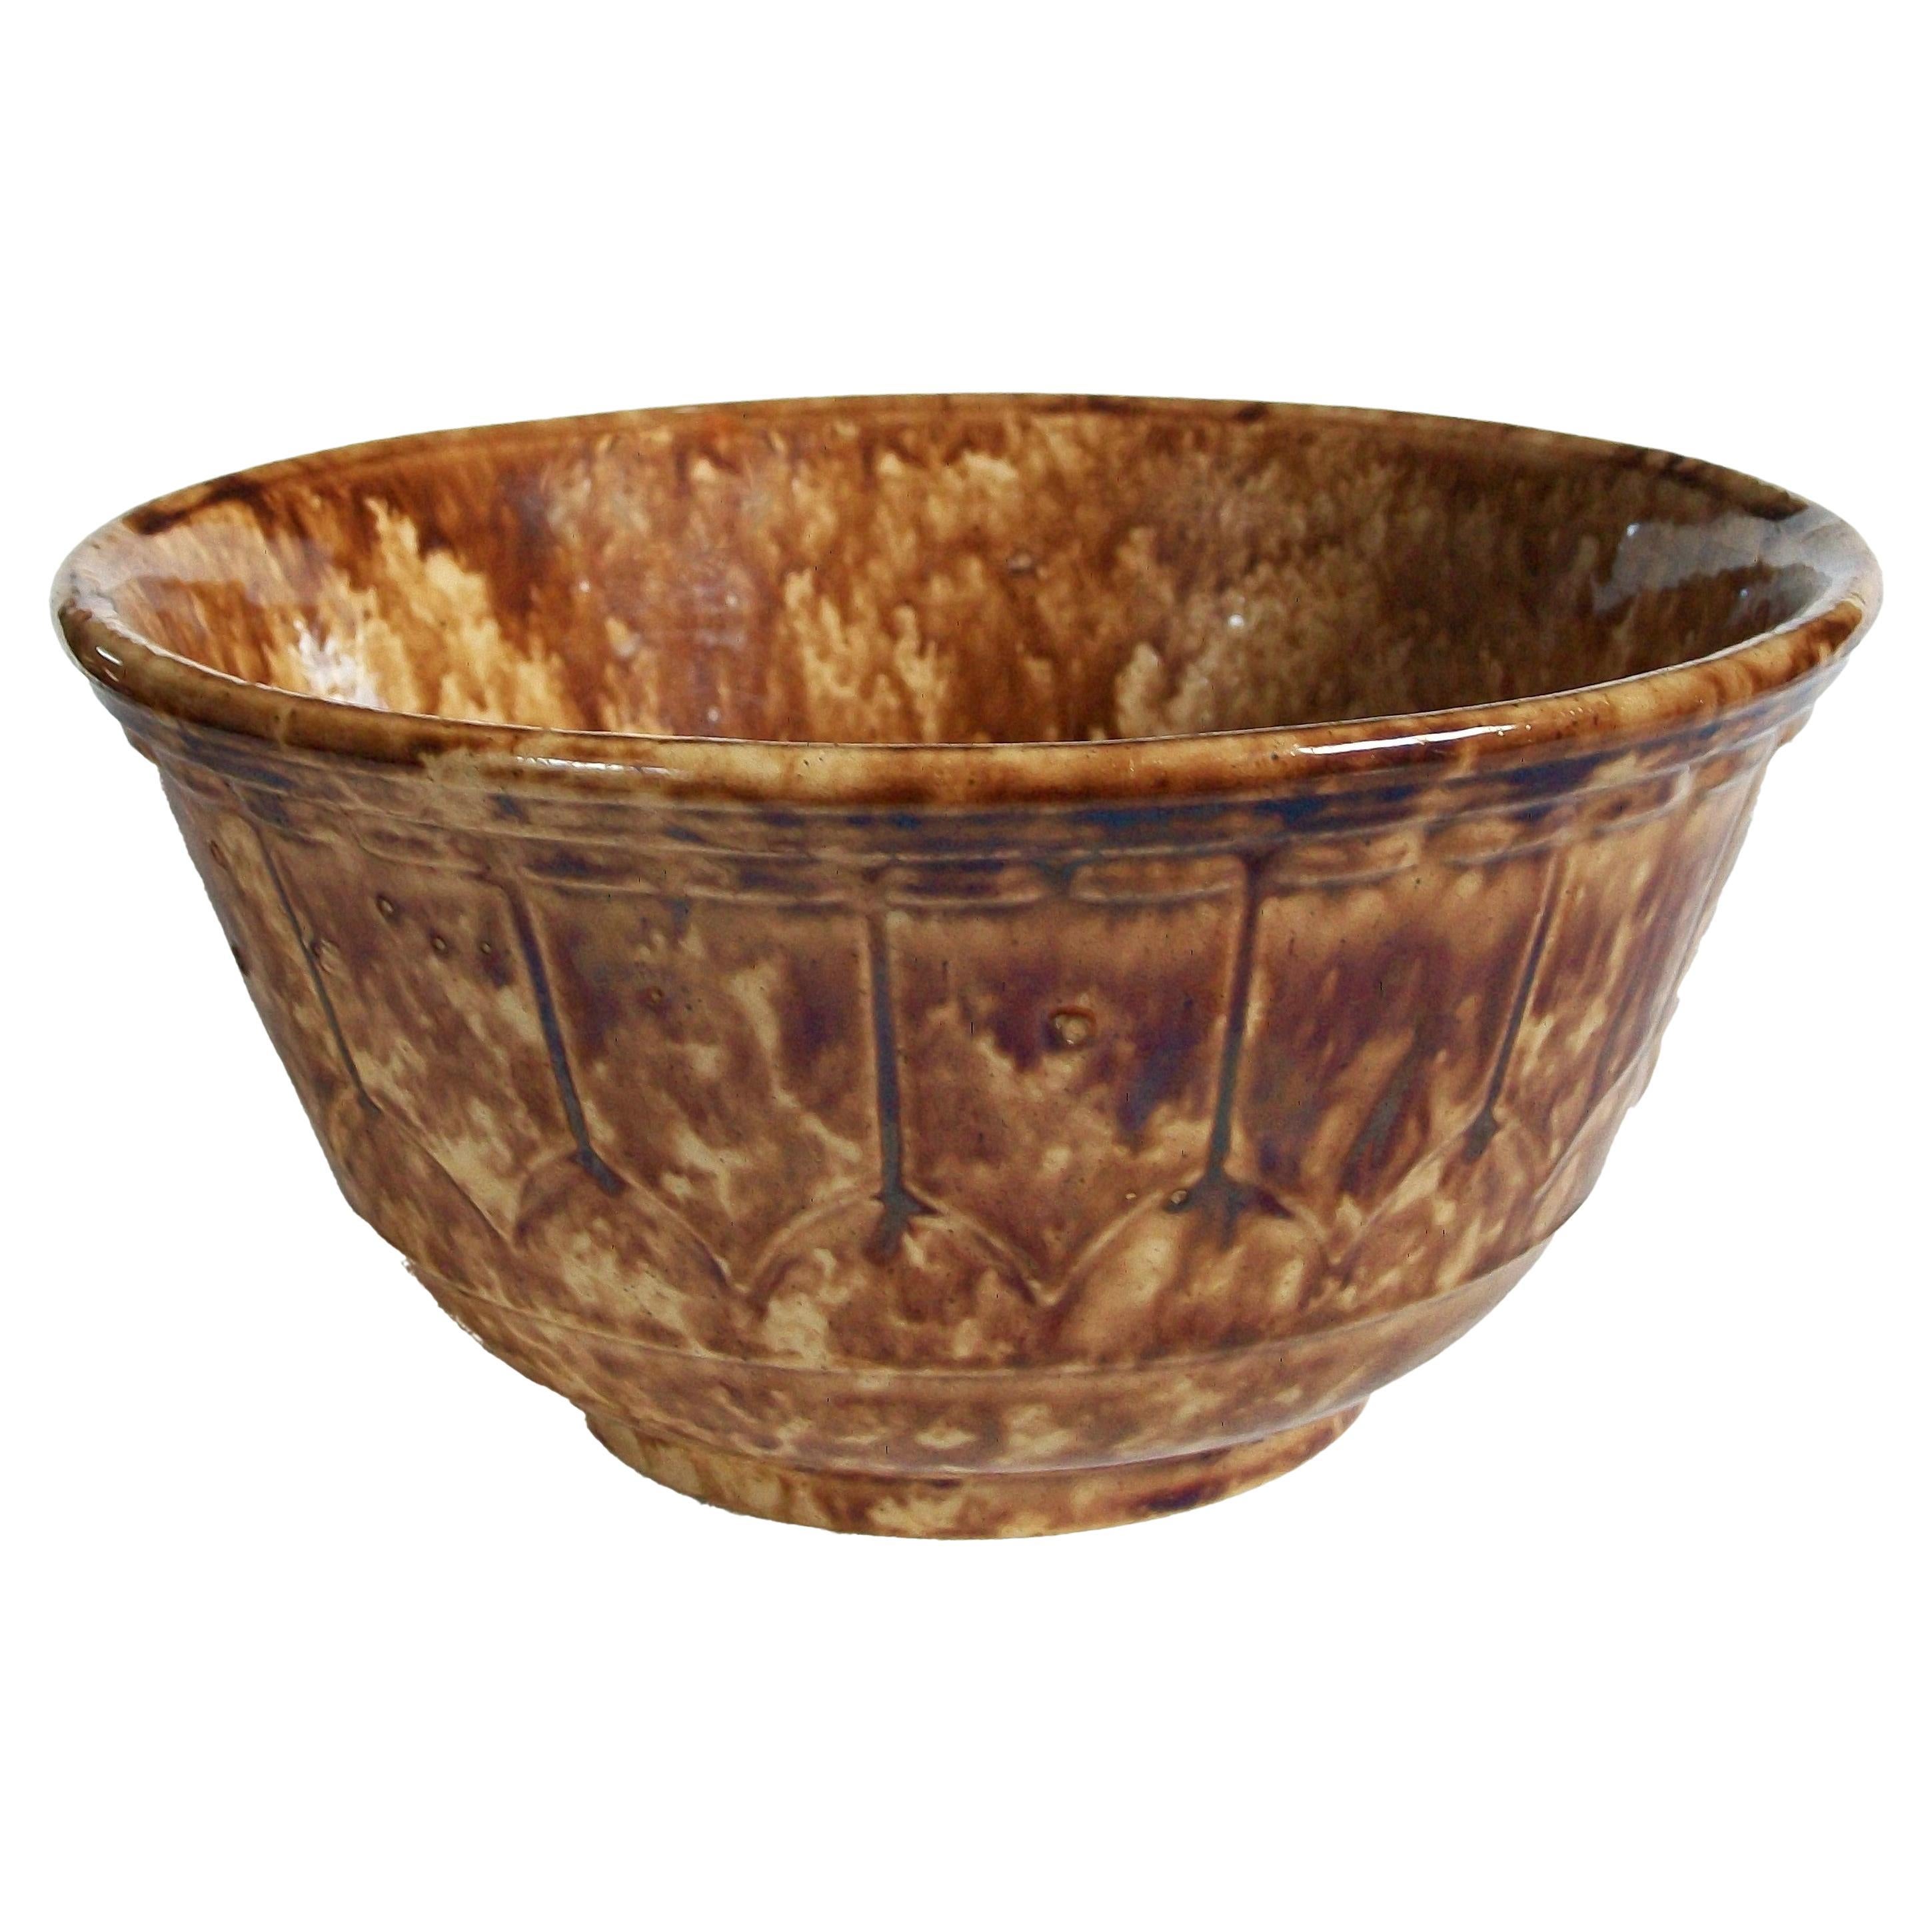 Bennington Type Brown Spatterware Bowl with Molded Sides, U.S.A., 19th Century For Sale